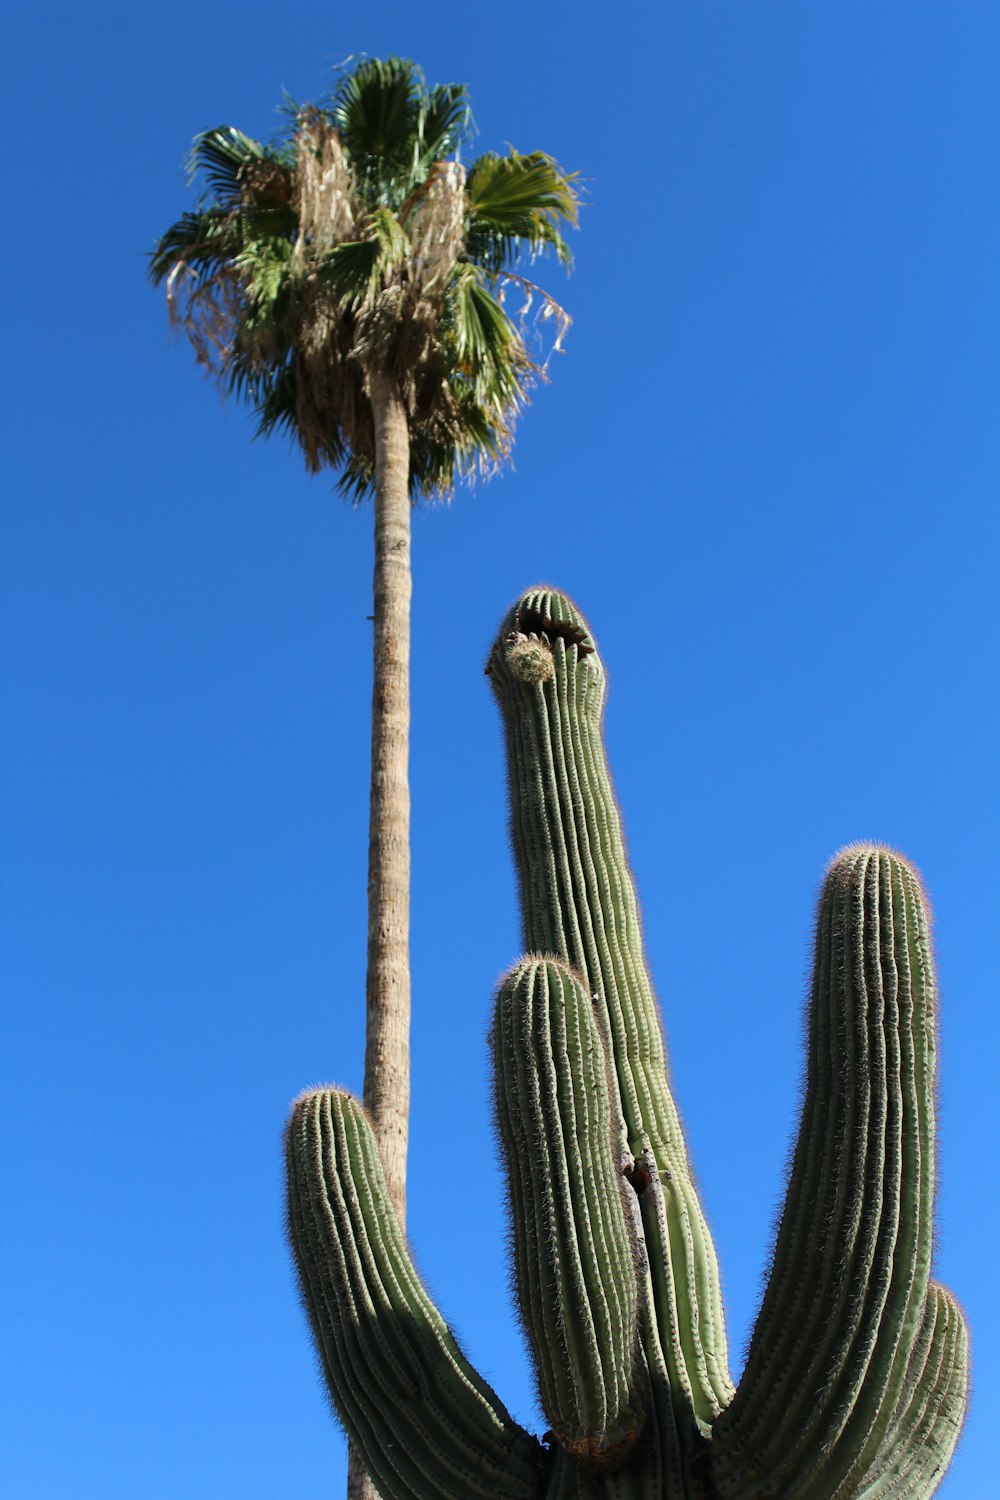 a tall green cactus next to a tall palm tree